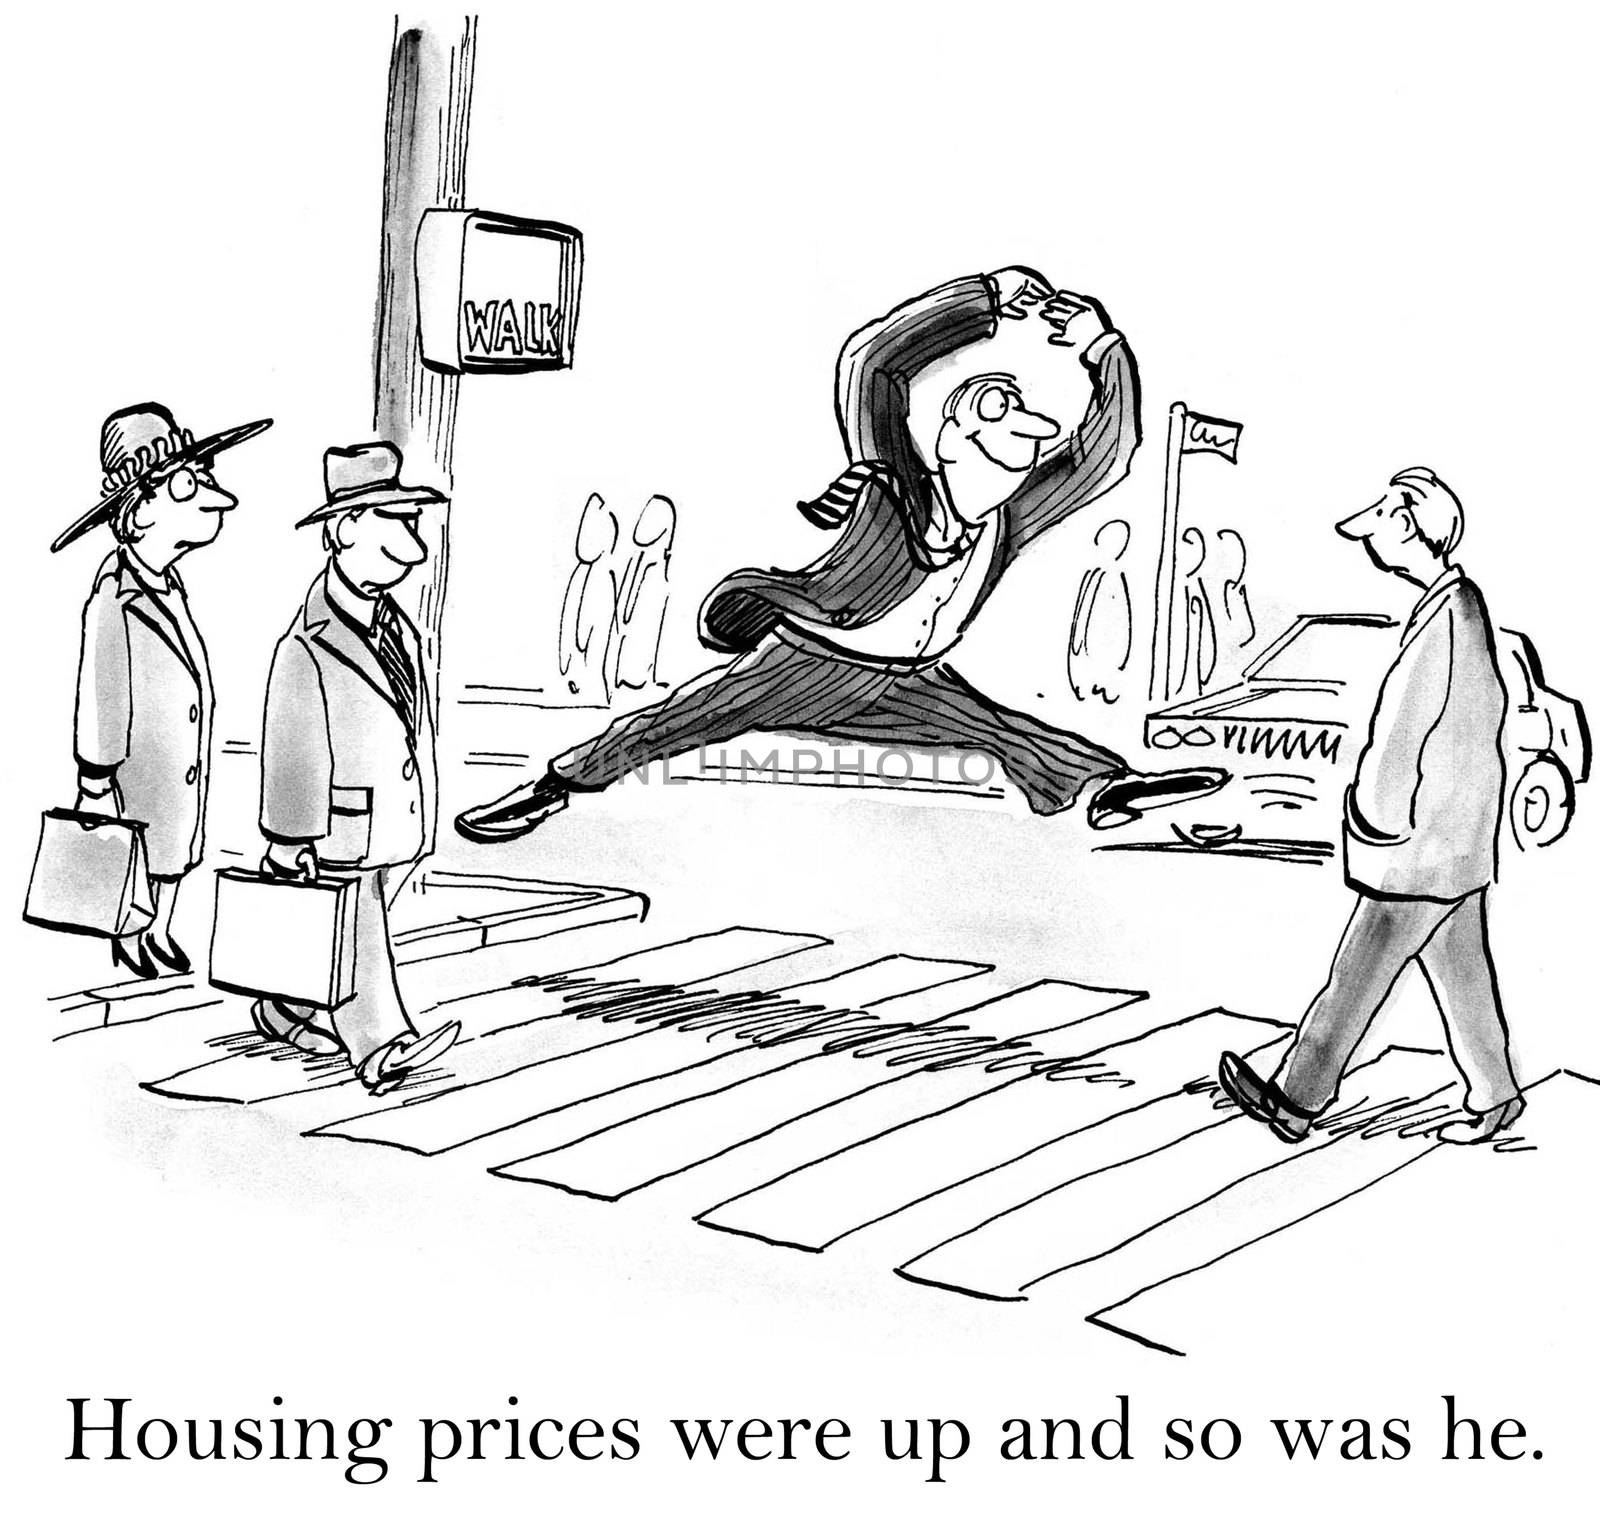 Housing prices were up and so was he by andrewgenn